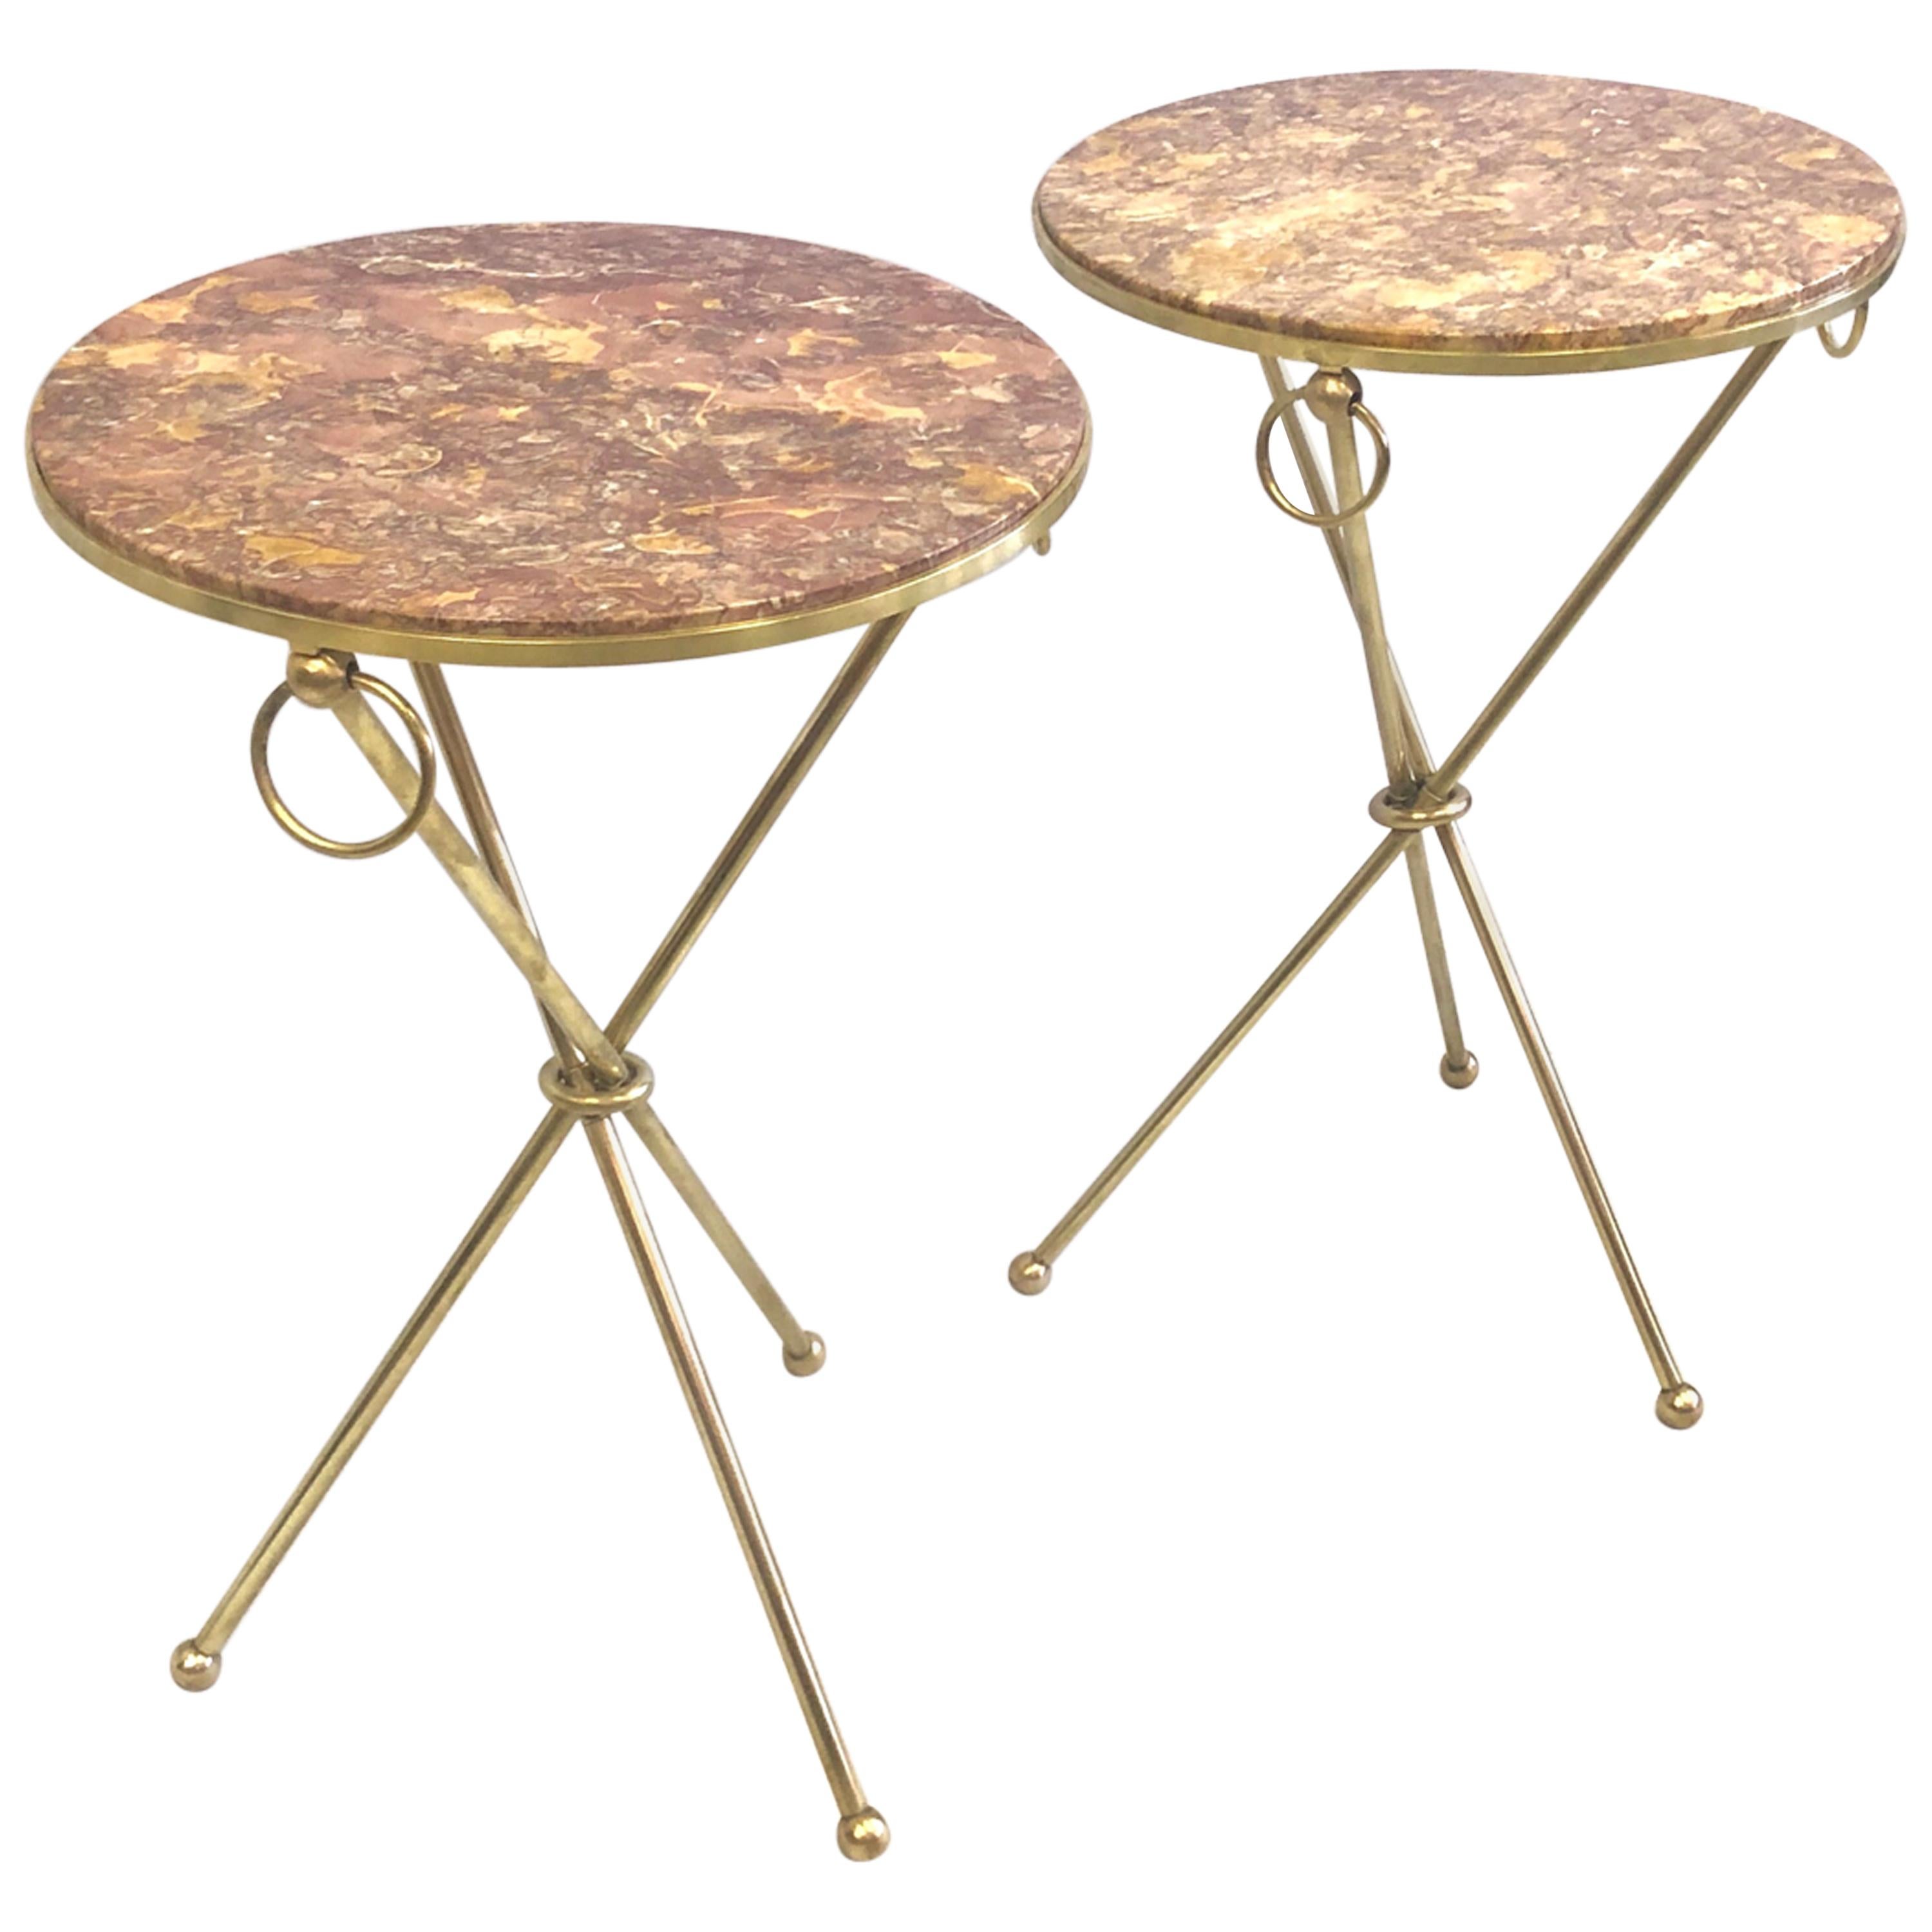 Pair of French Modern Neoclassical Brass & Marble Side Tables, Jean-Michel Frank